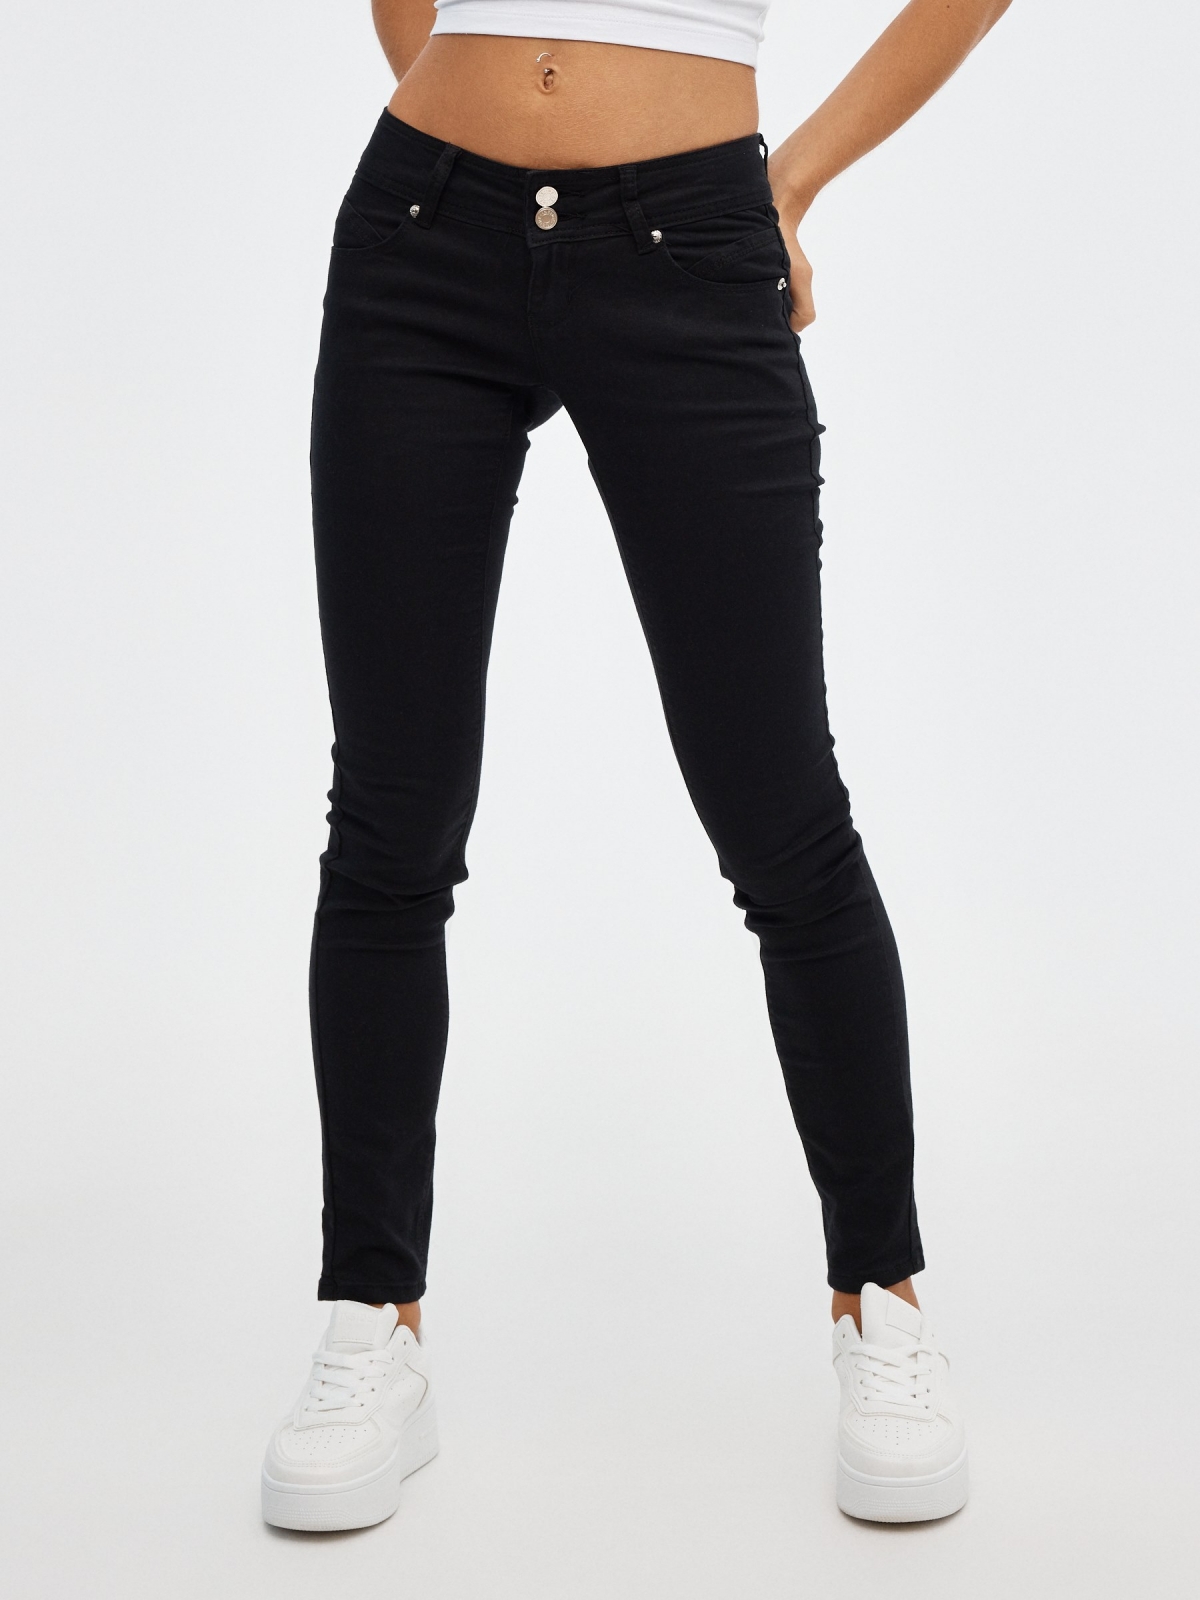 Low rise skinny jeans black middle front view